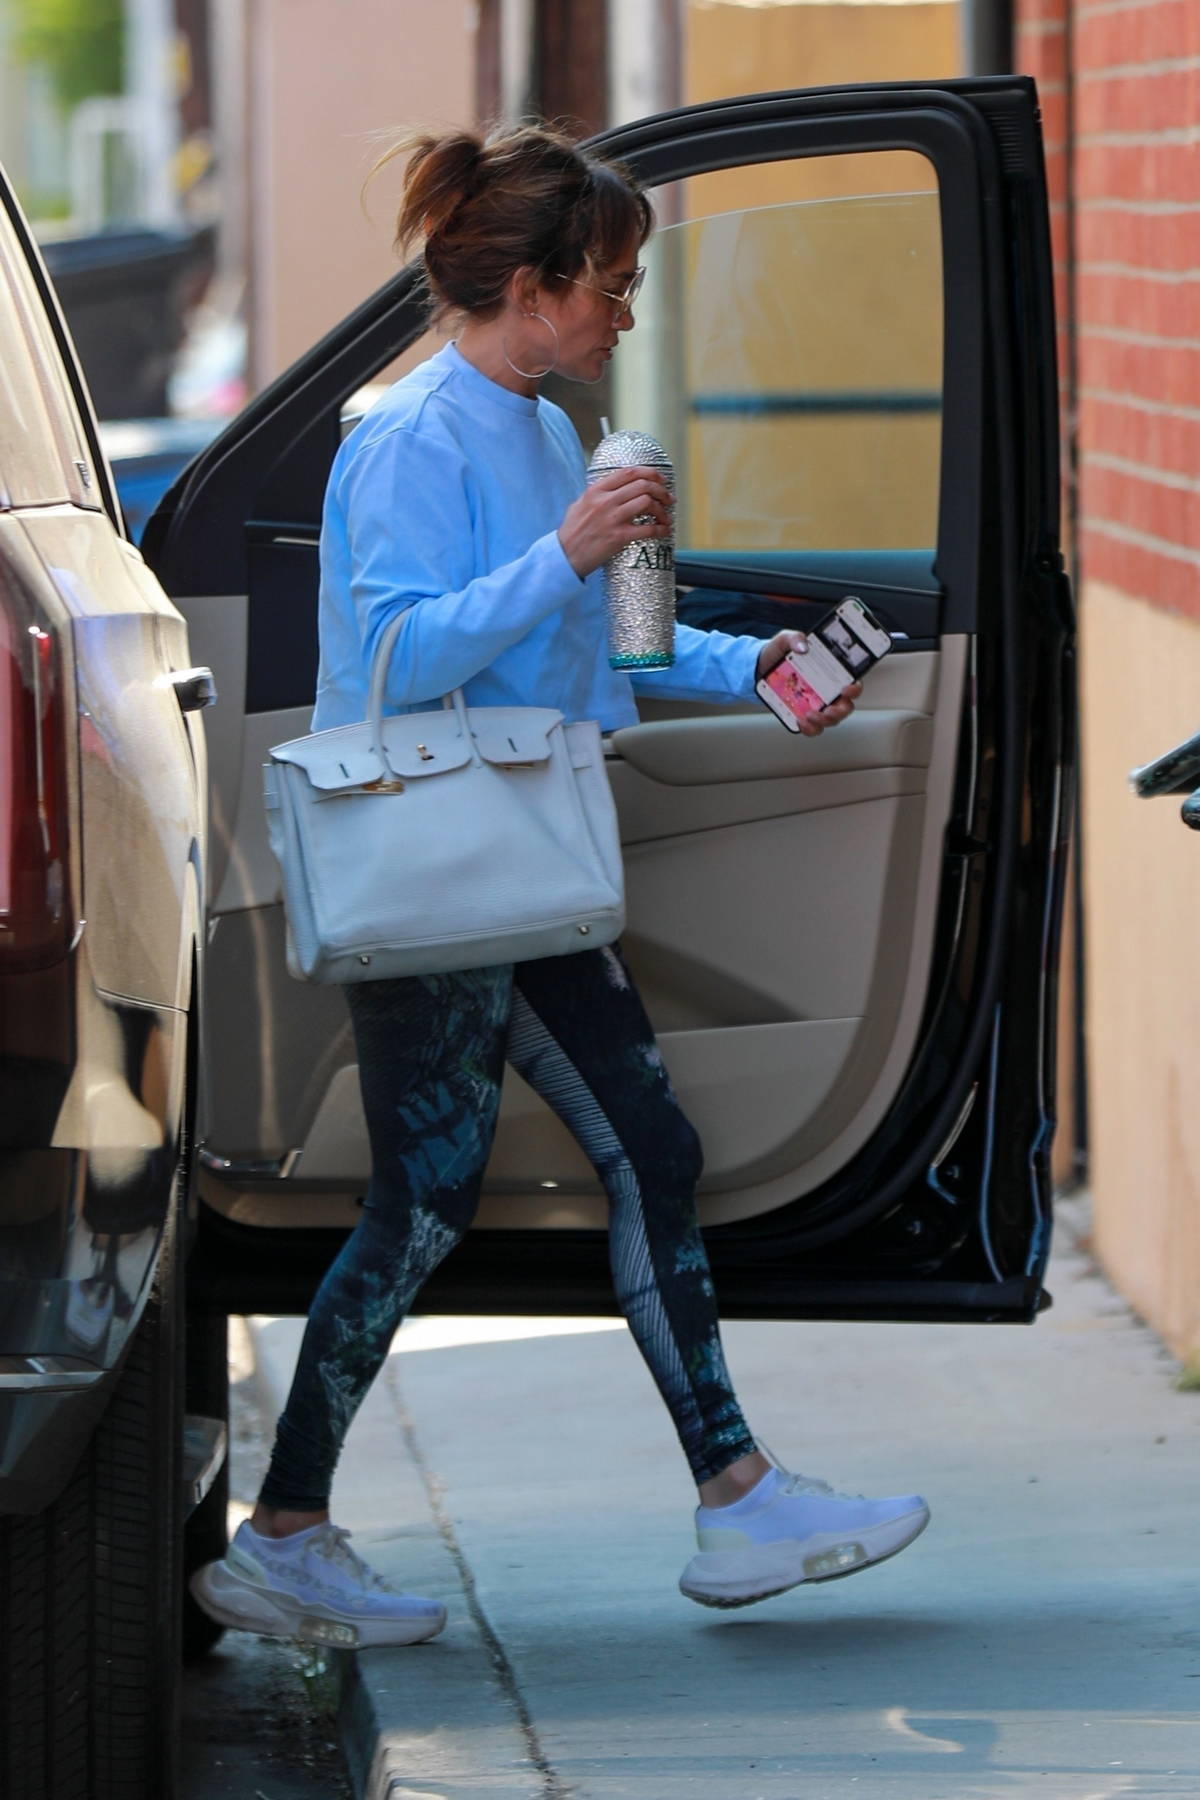 https://www.celebsfirst.com/wp-content/uploads/2023/07/Jennifer-Lopez-sports-a-light-blue-sweatshirt-and-patterned-leggings-for-a-workout-session-in-Studio-City-California-120723_1.jpg